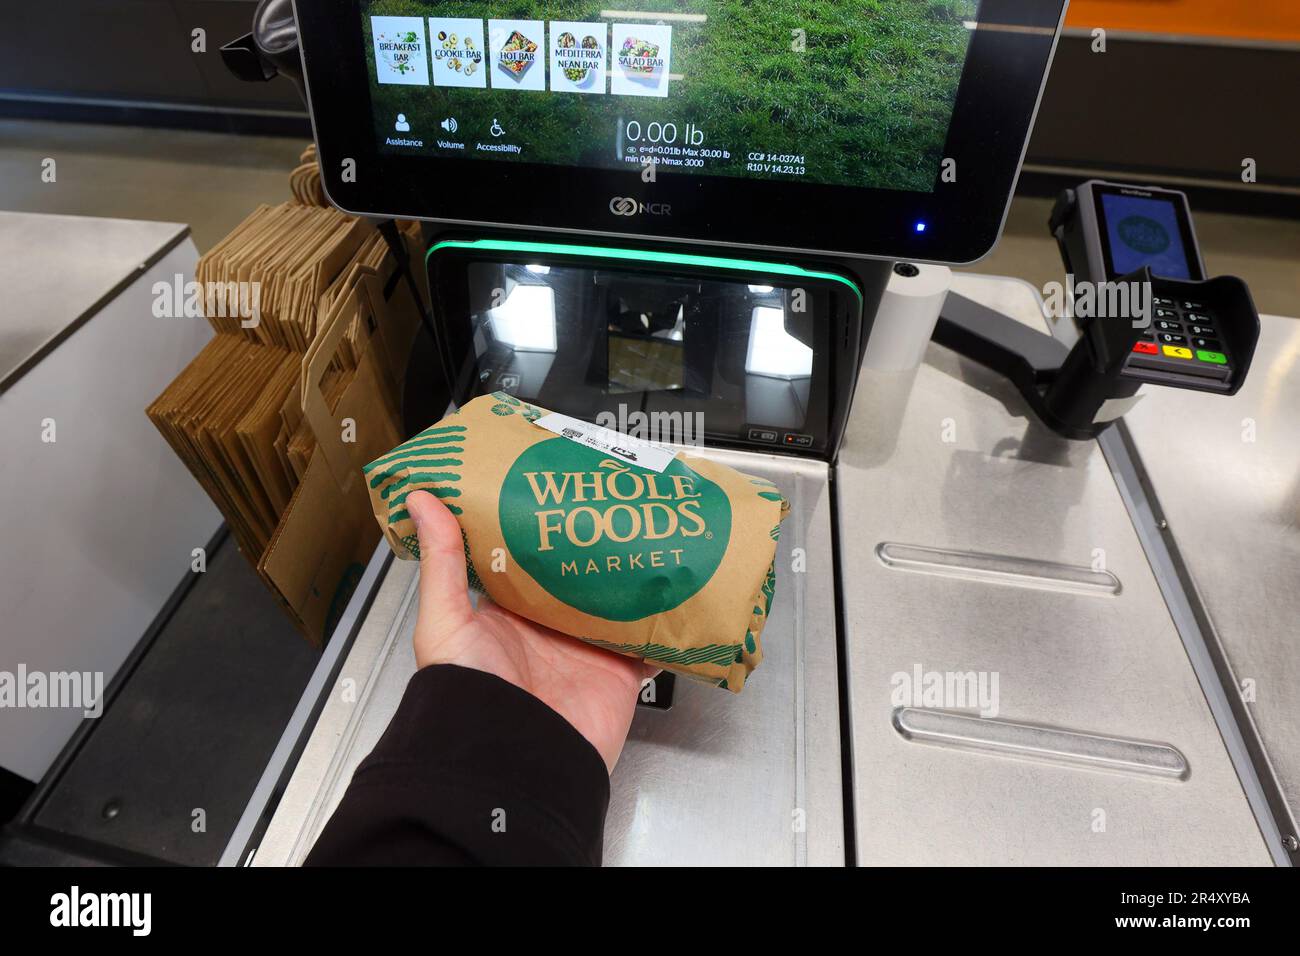 A person scans a grocery item at a Whole Foods Market self checkout station. Stock Photo